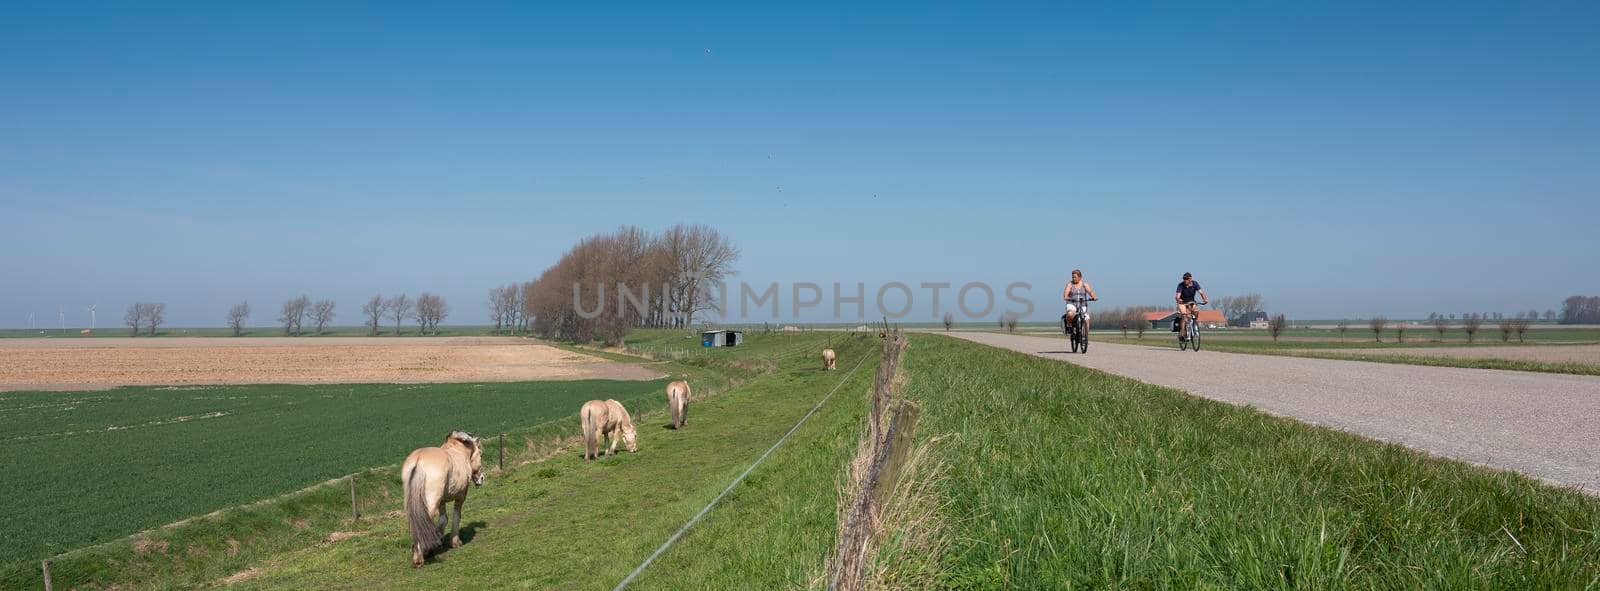 wissenkerke, netherlands, 31 march 2021: horses graze near country road with people on bicycle on island of noord beveland in dutch province of zeeland in the netherlands on sunny day early spring